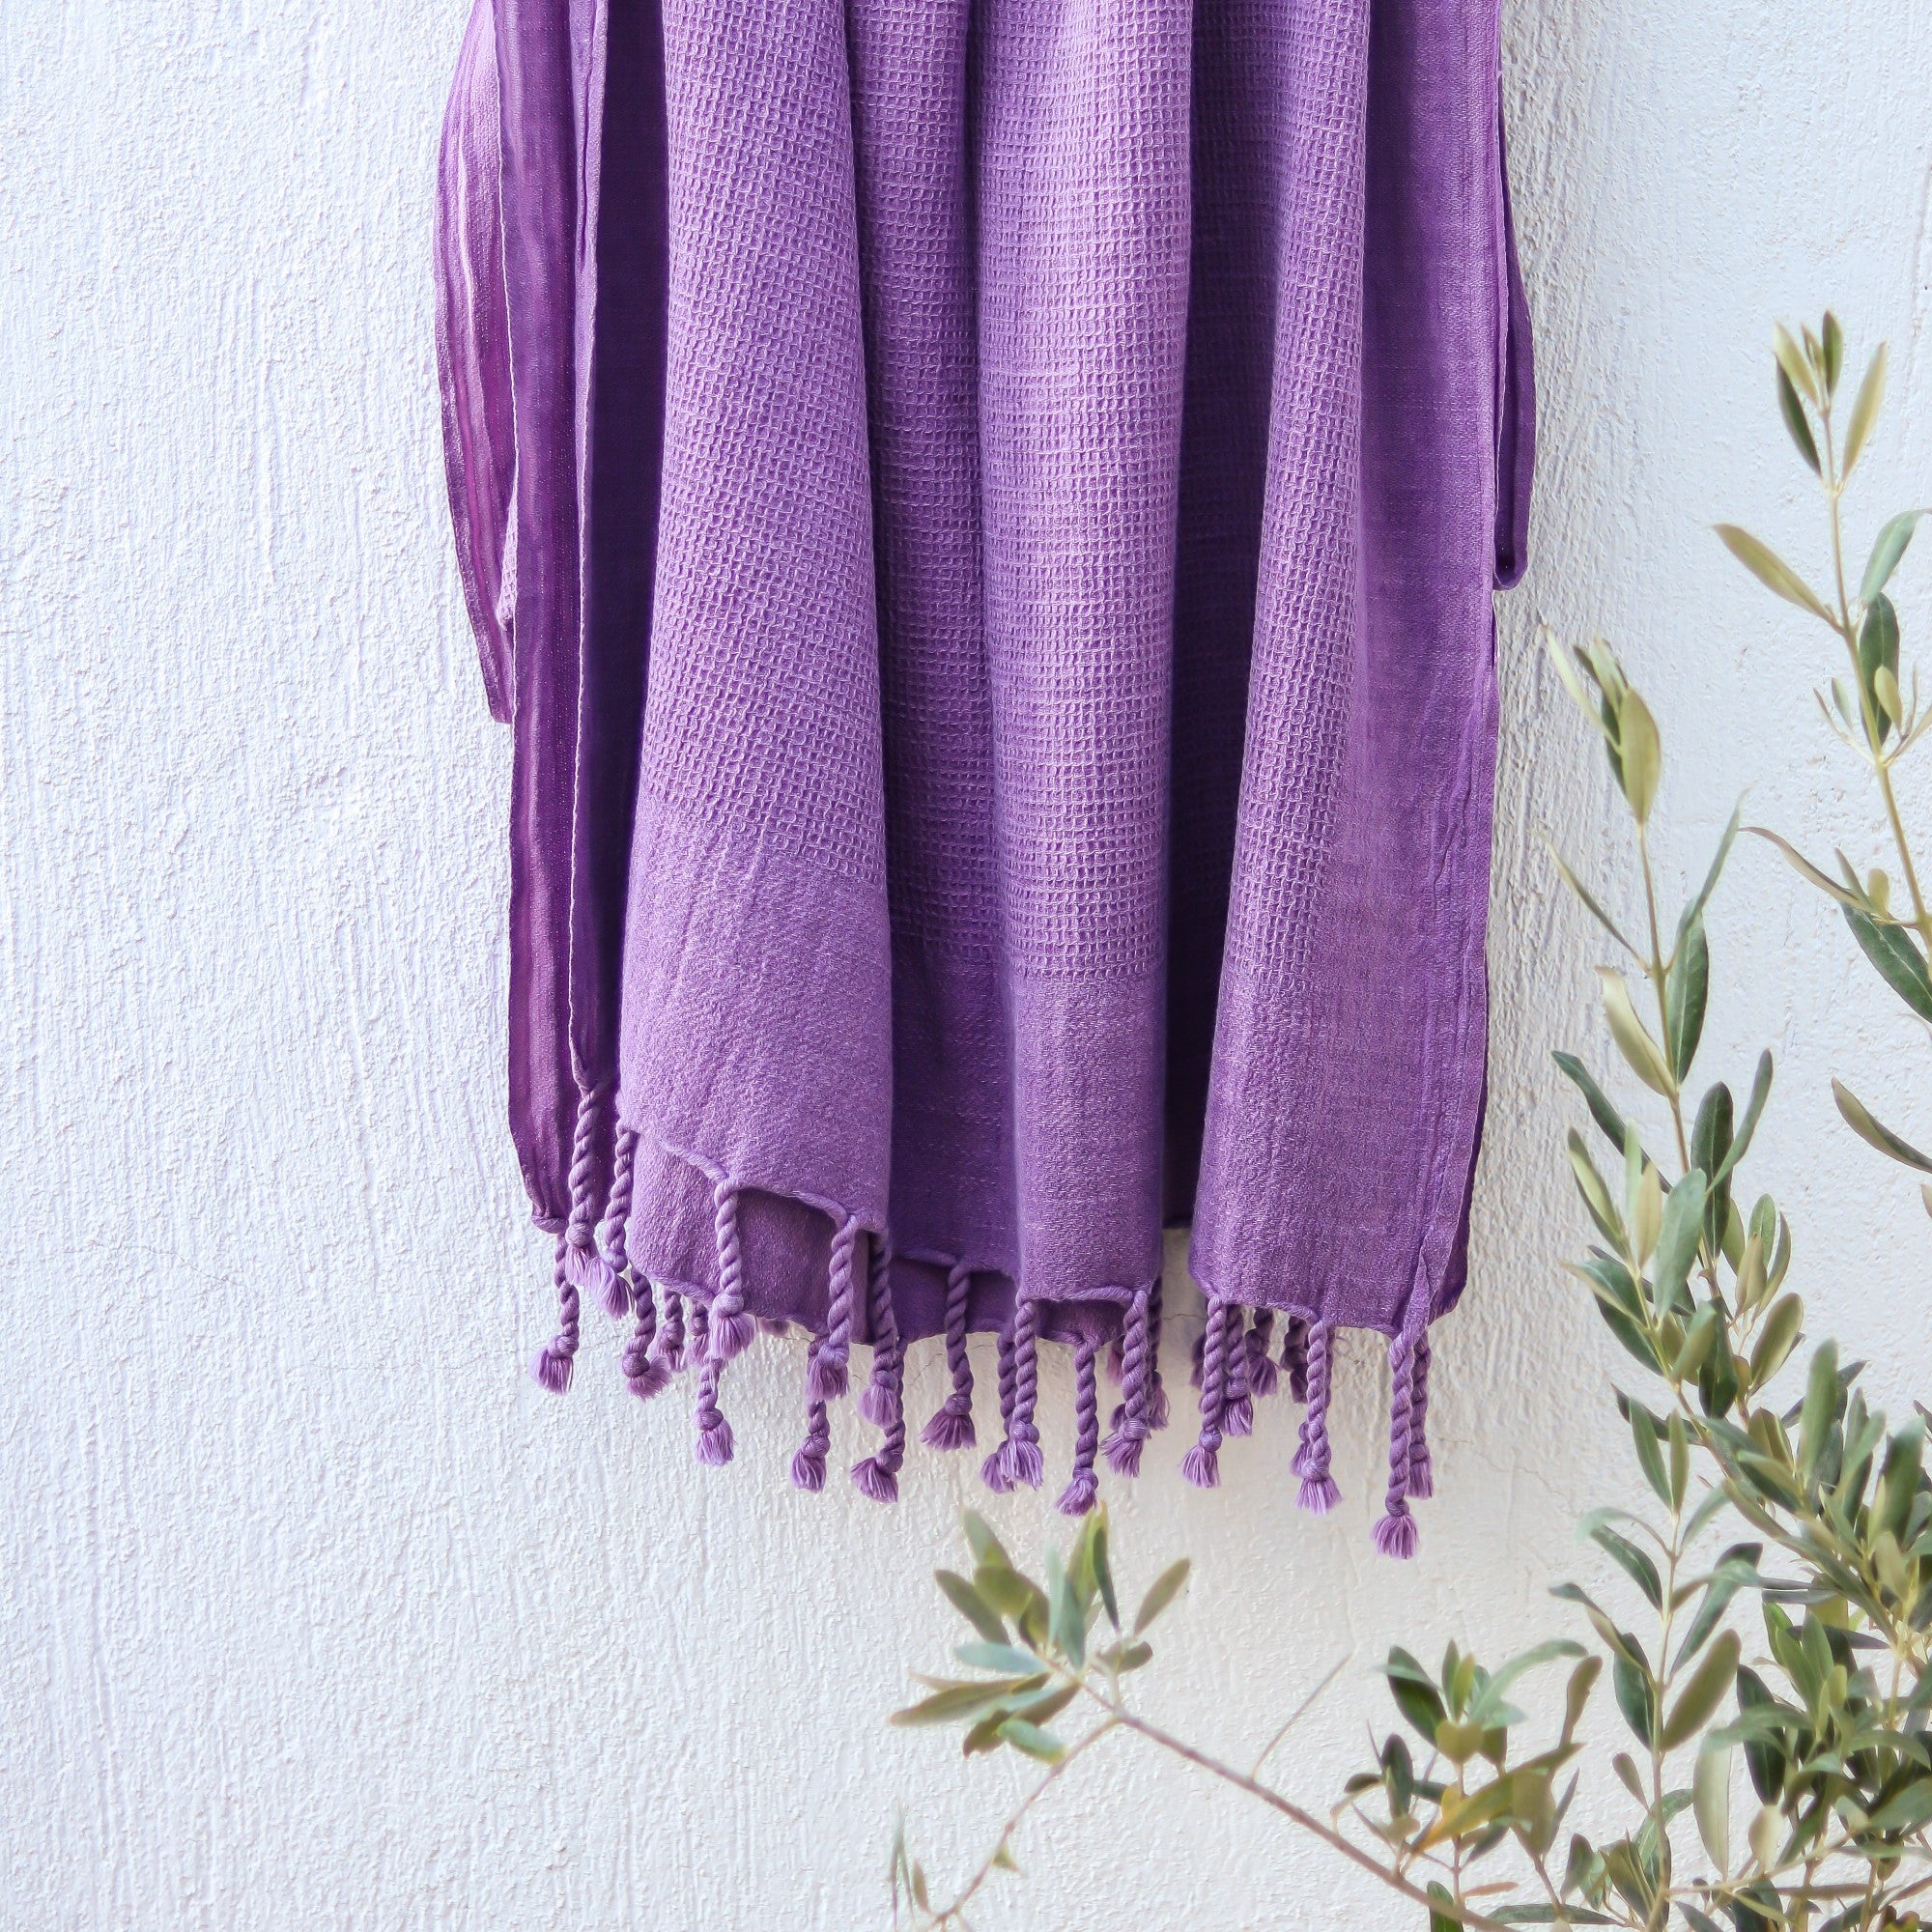 Lavender Turkish Kitchen / Hand Towel | Ethically Made & Sustainable | 100% Turkish Cotton (Purple) by Anatolico